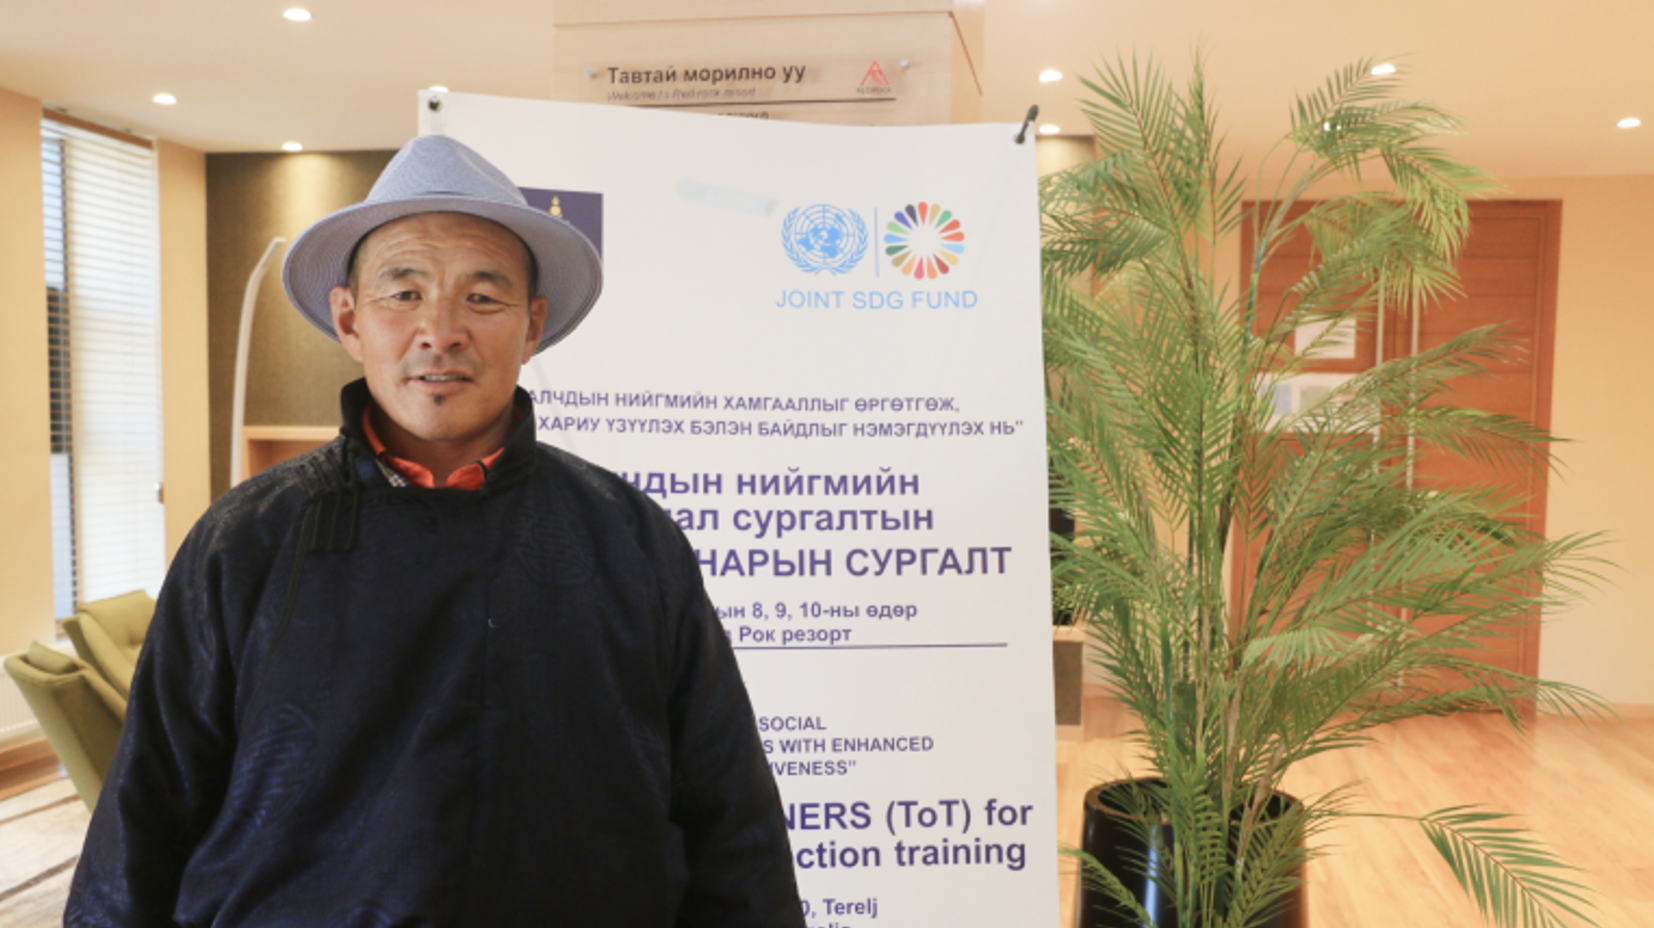 L.Batbaatar during the training of teachers in September 2020 that took place in Ulaanbaatar, Mongolia.